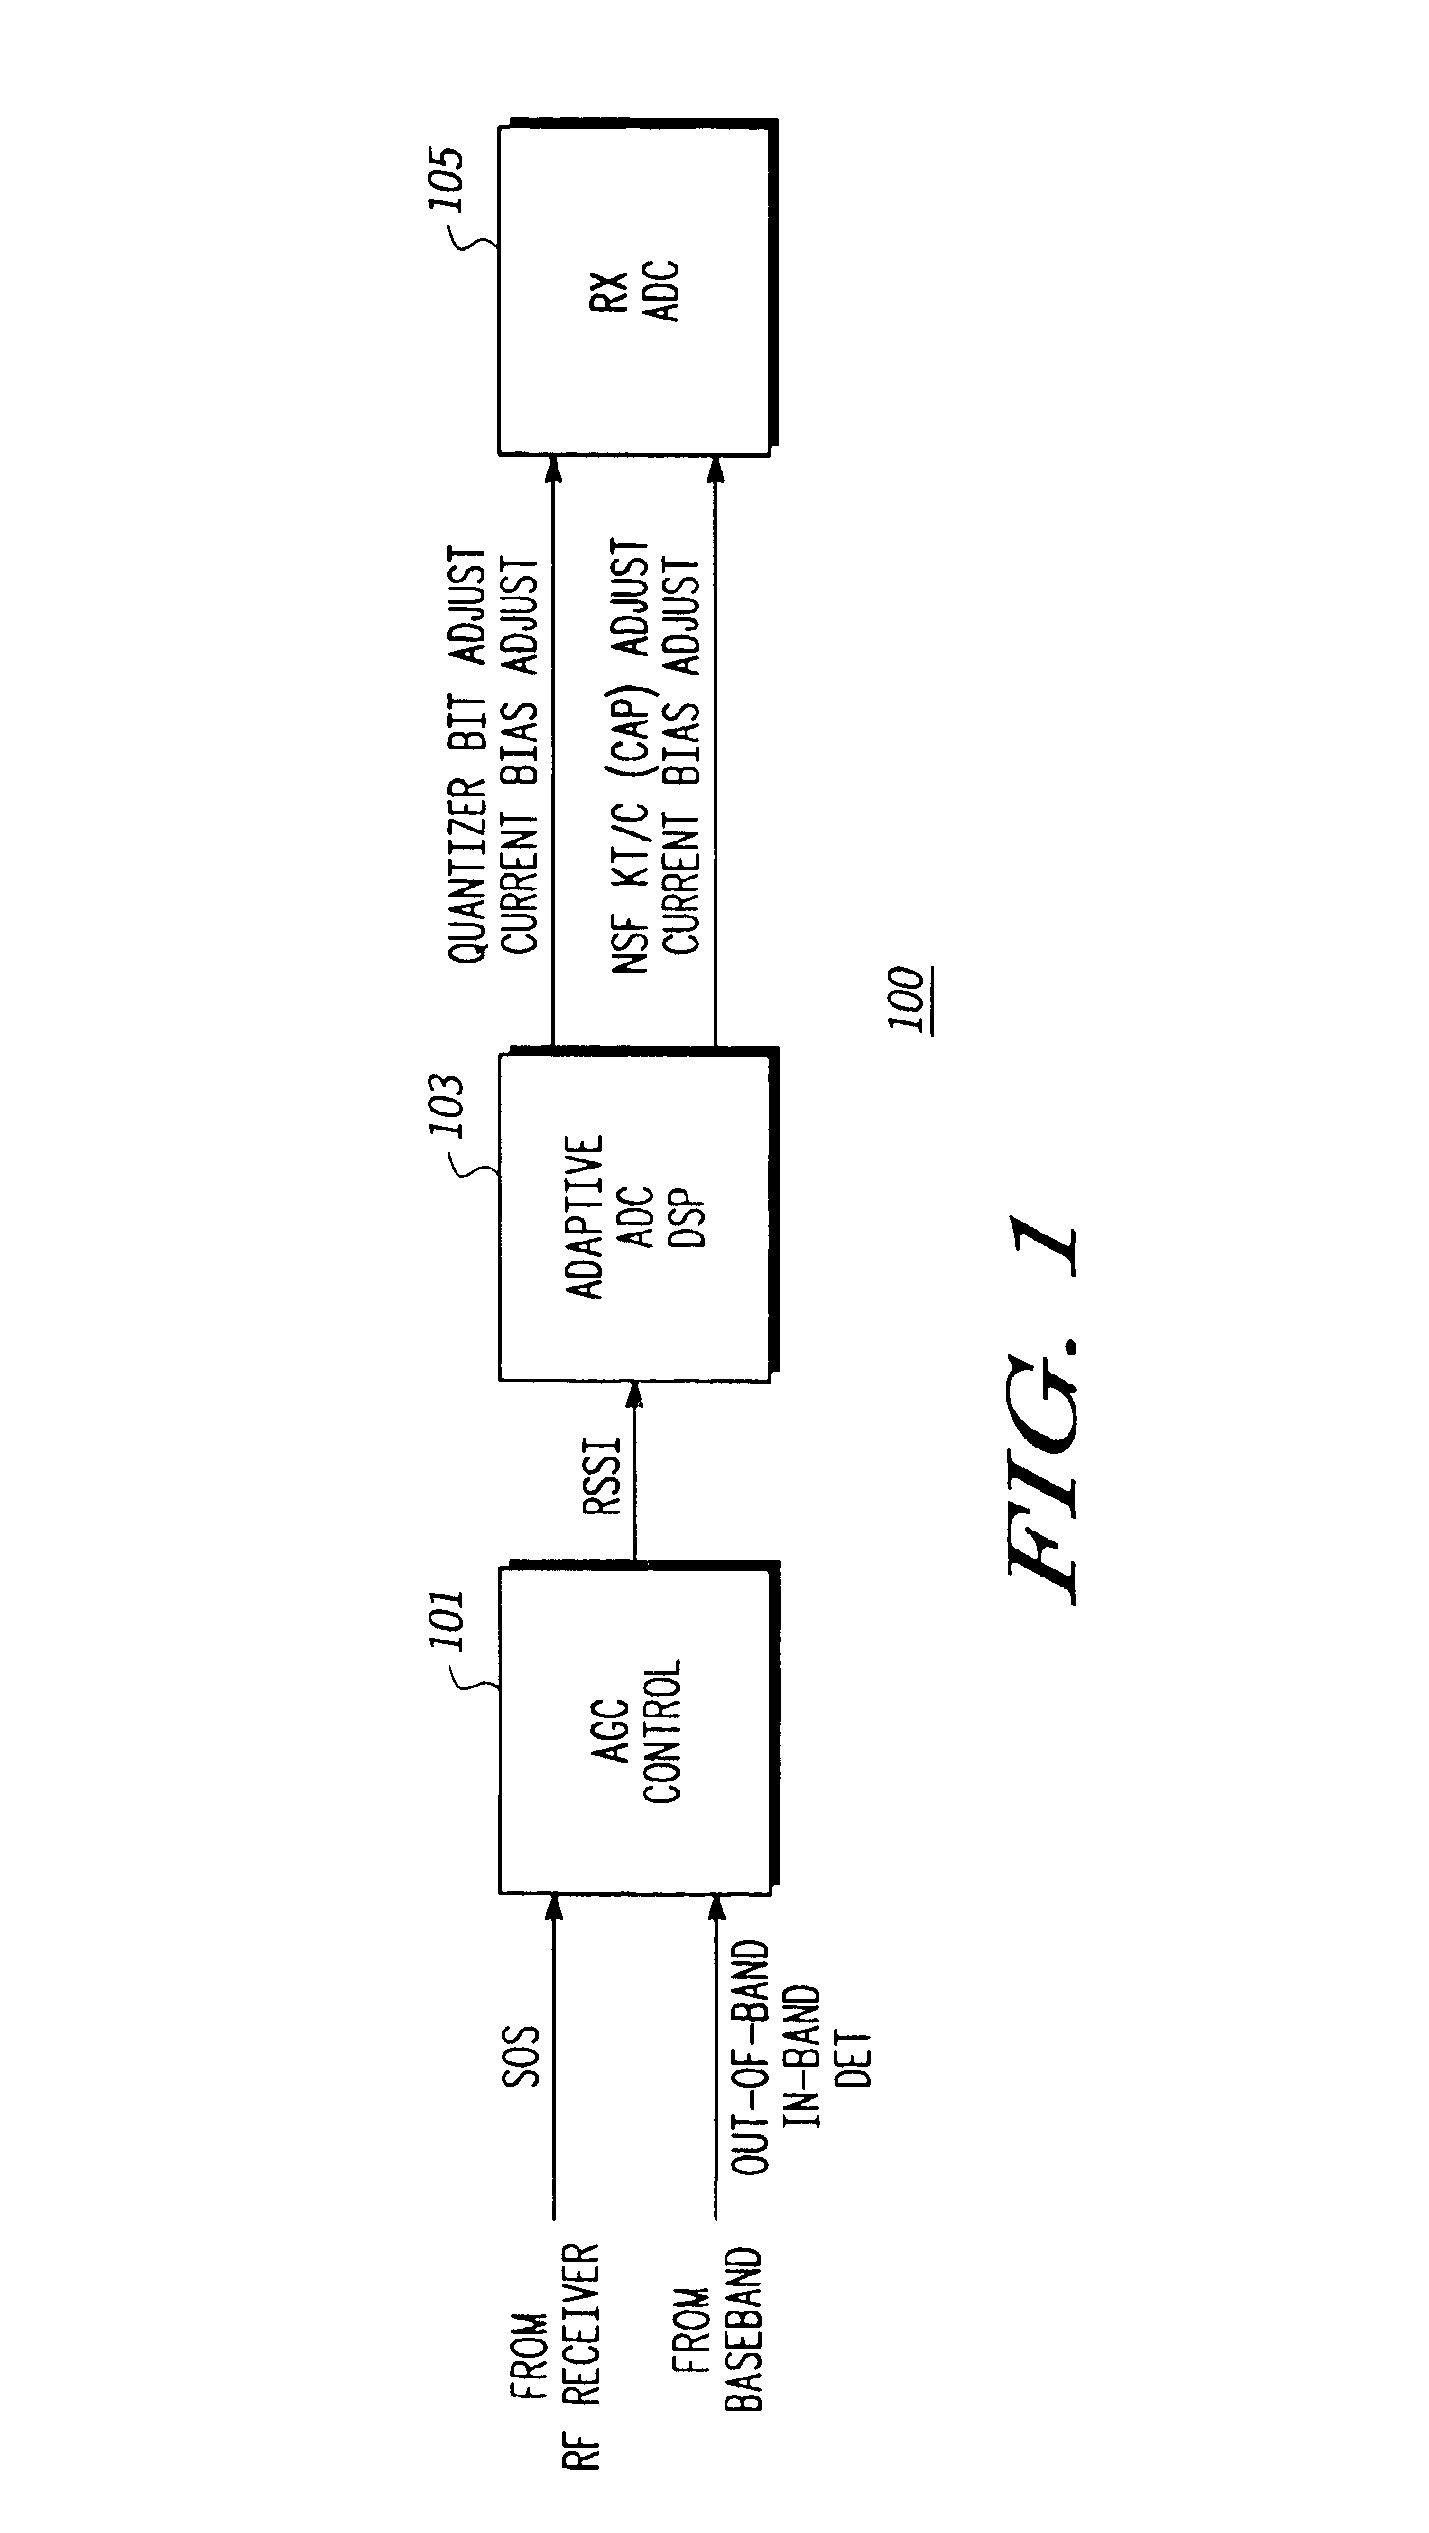 Signaling dependent adaptive analog-to-digital converter (ADC) system and method of using same